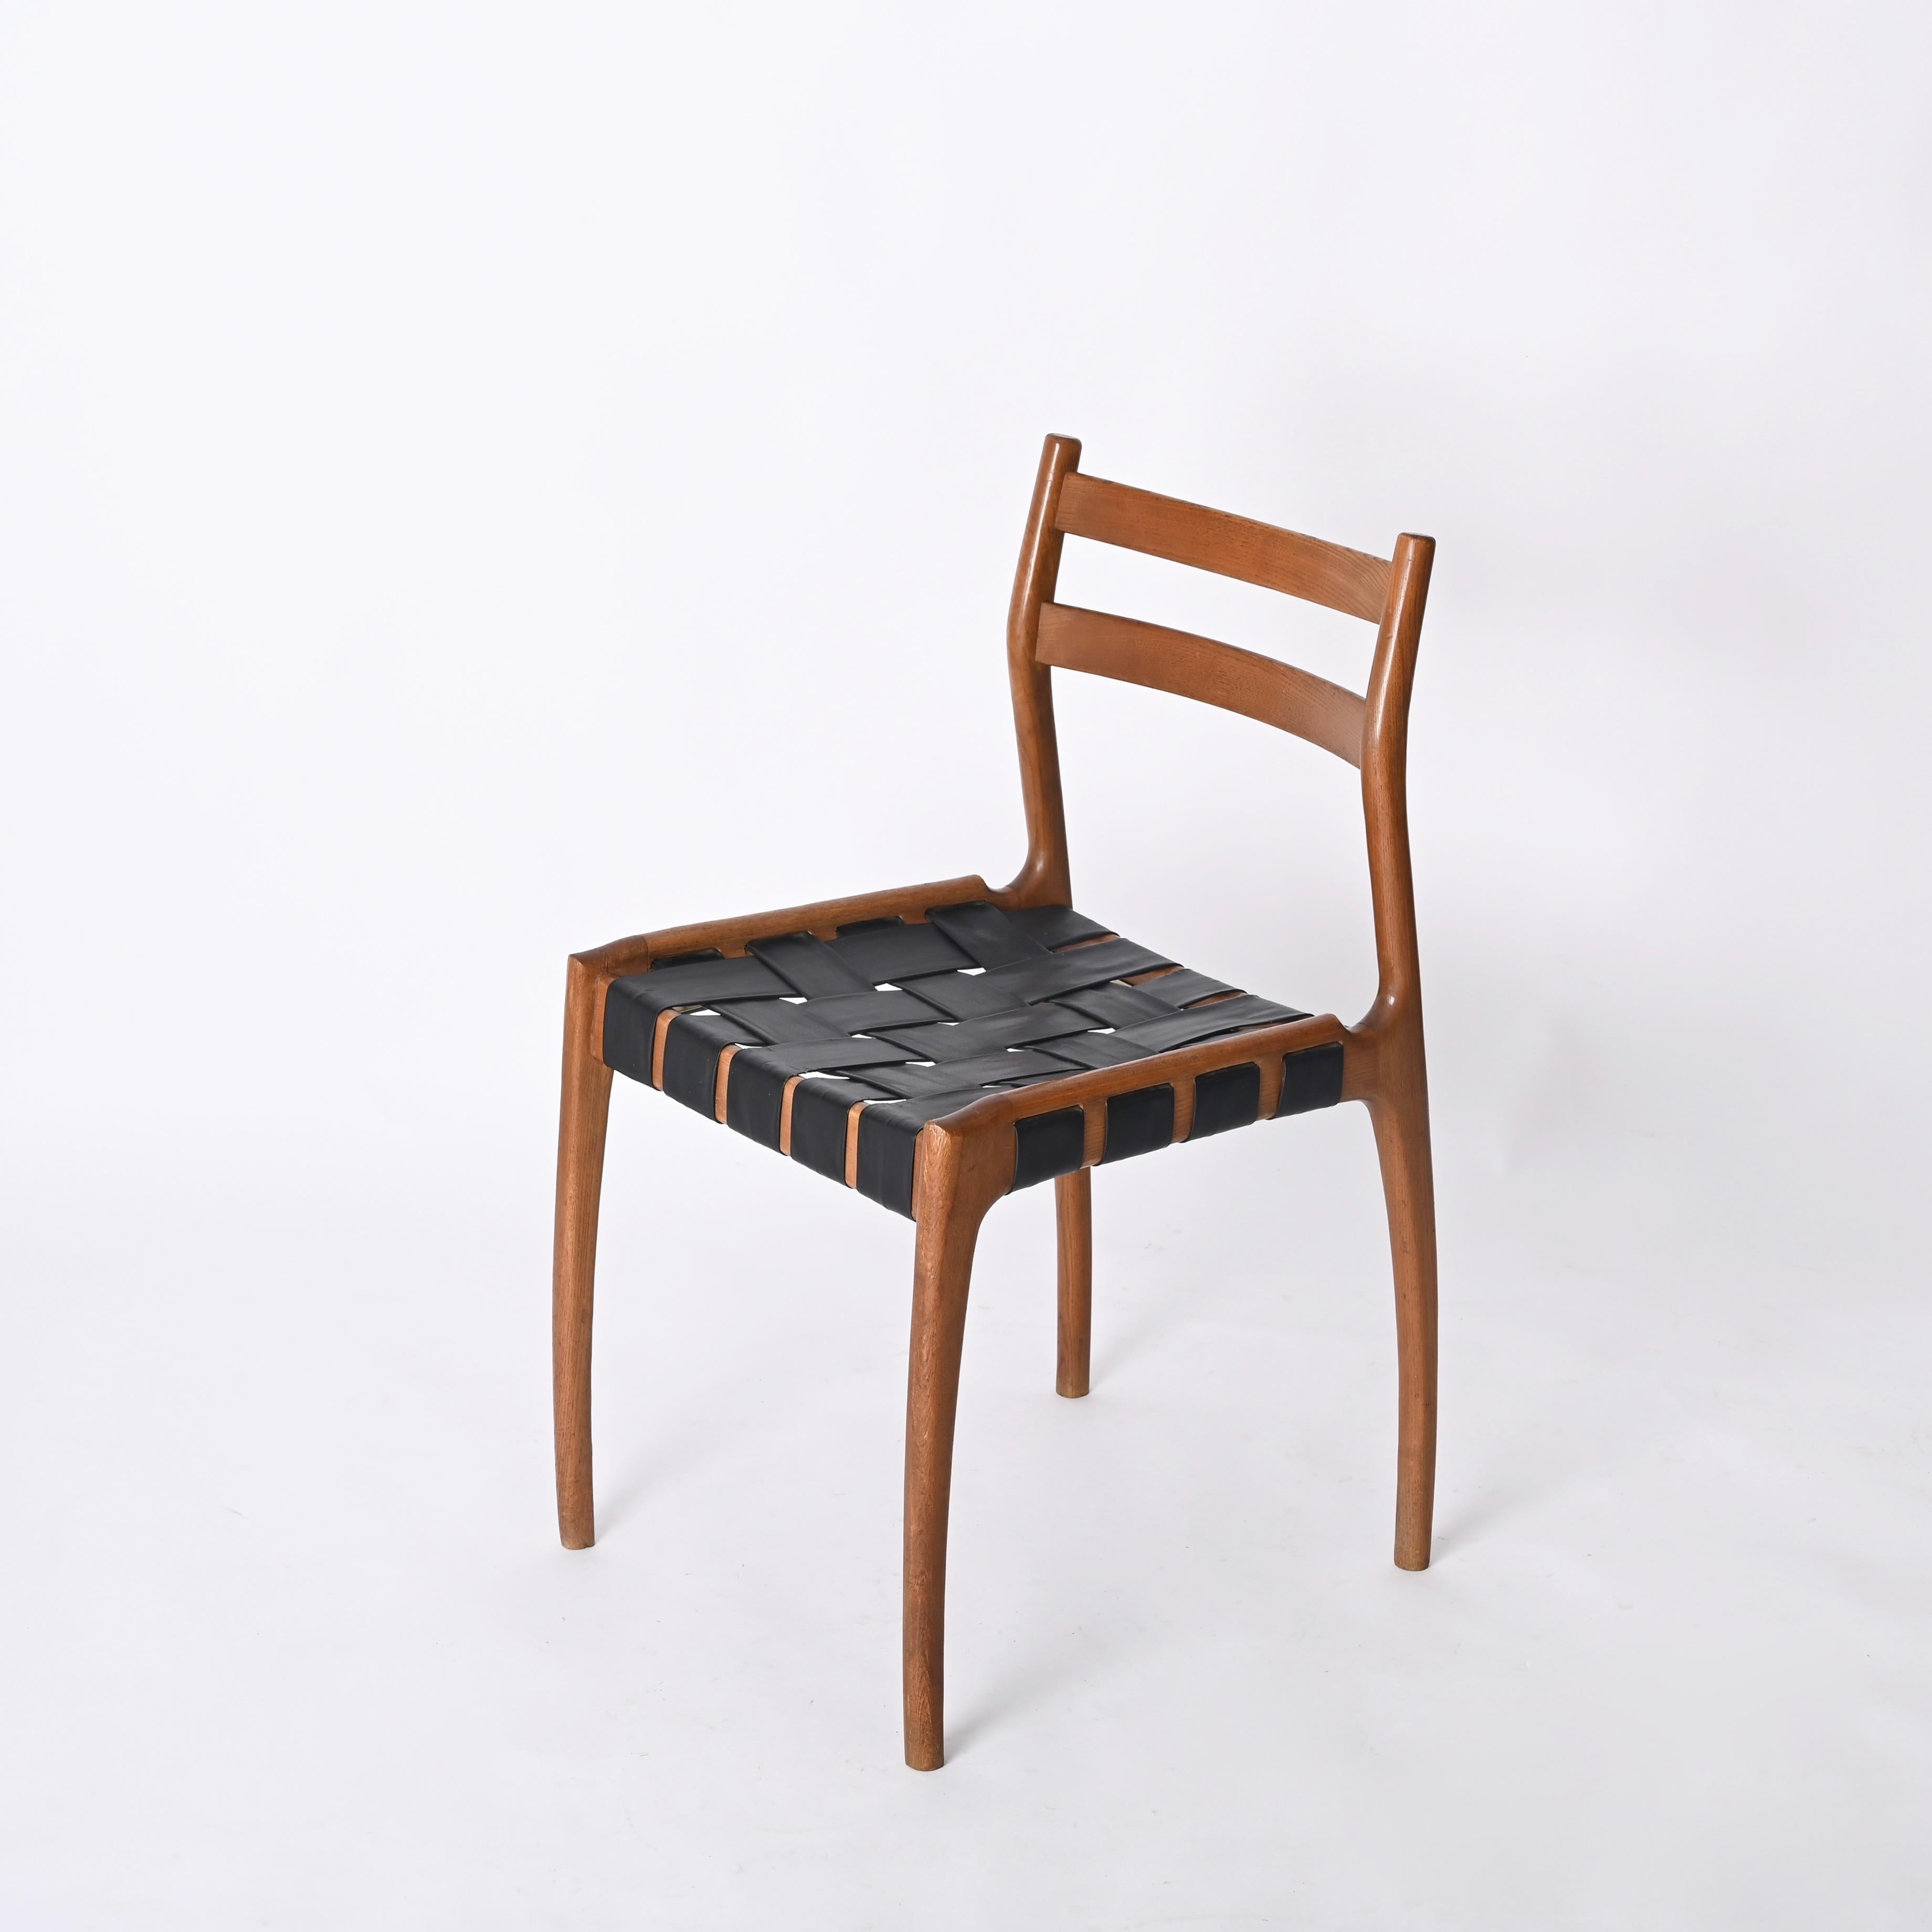 Italian Mid-Century Chair in Oak and Leather by Palange for Montina, 1960s For Sale 2